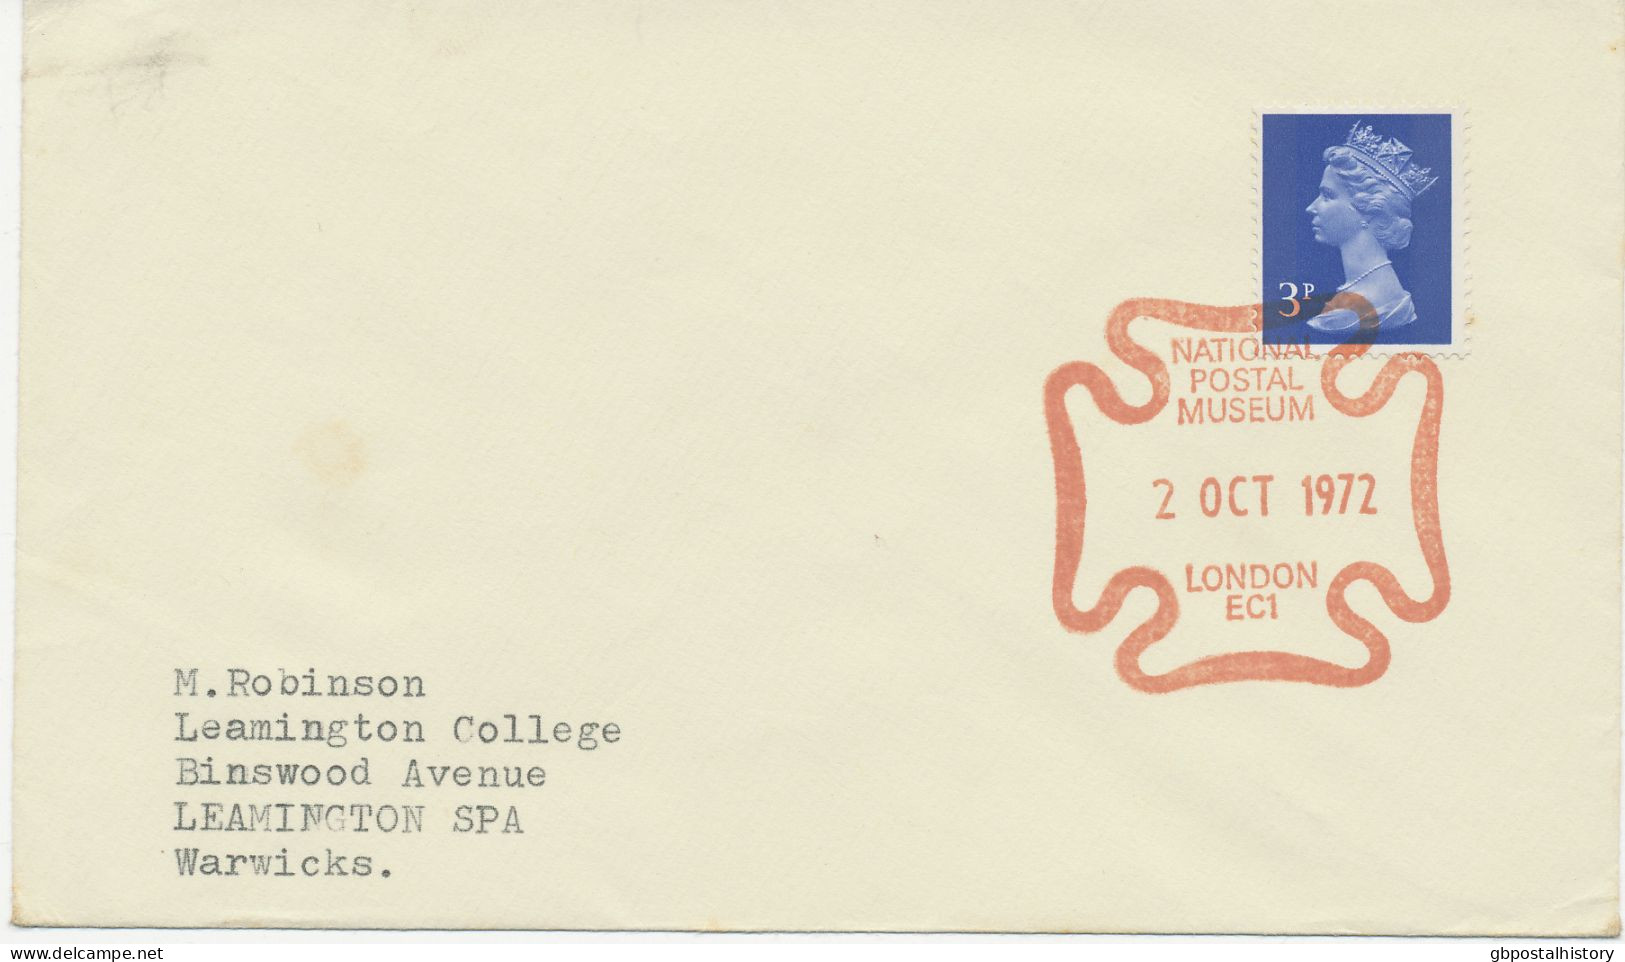 GB SPECIAL EVENT POSTMARKS 1972 NATIONAL POSTAL MUSEUM LONDON EC1 In BROWN-RED - Covers & Documents